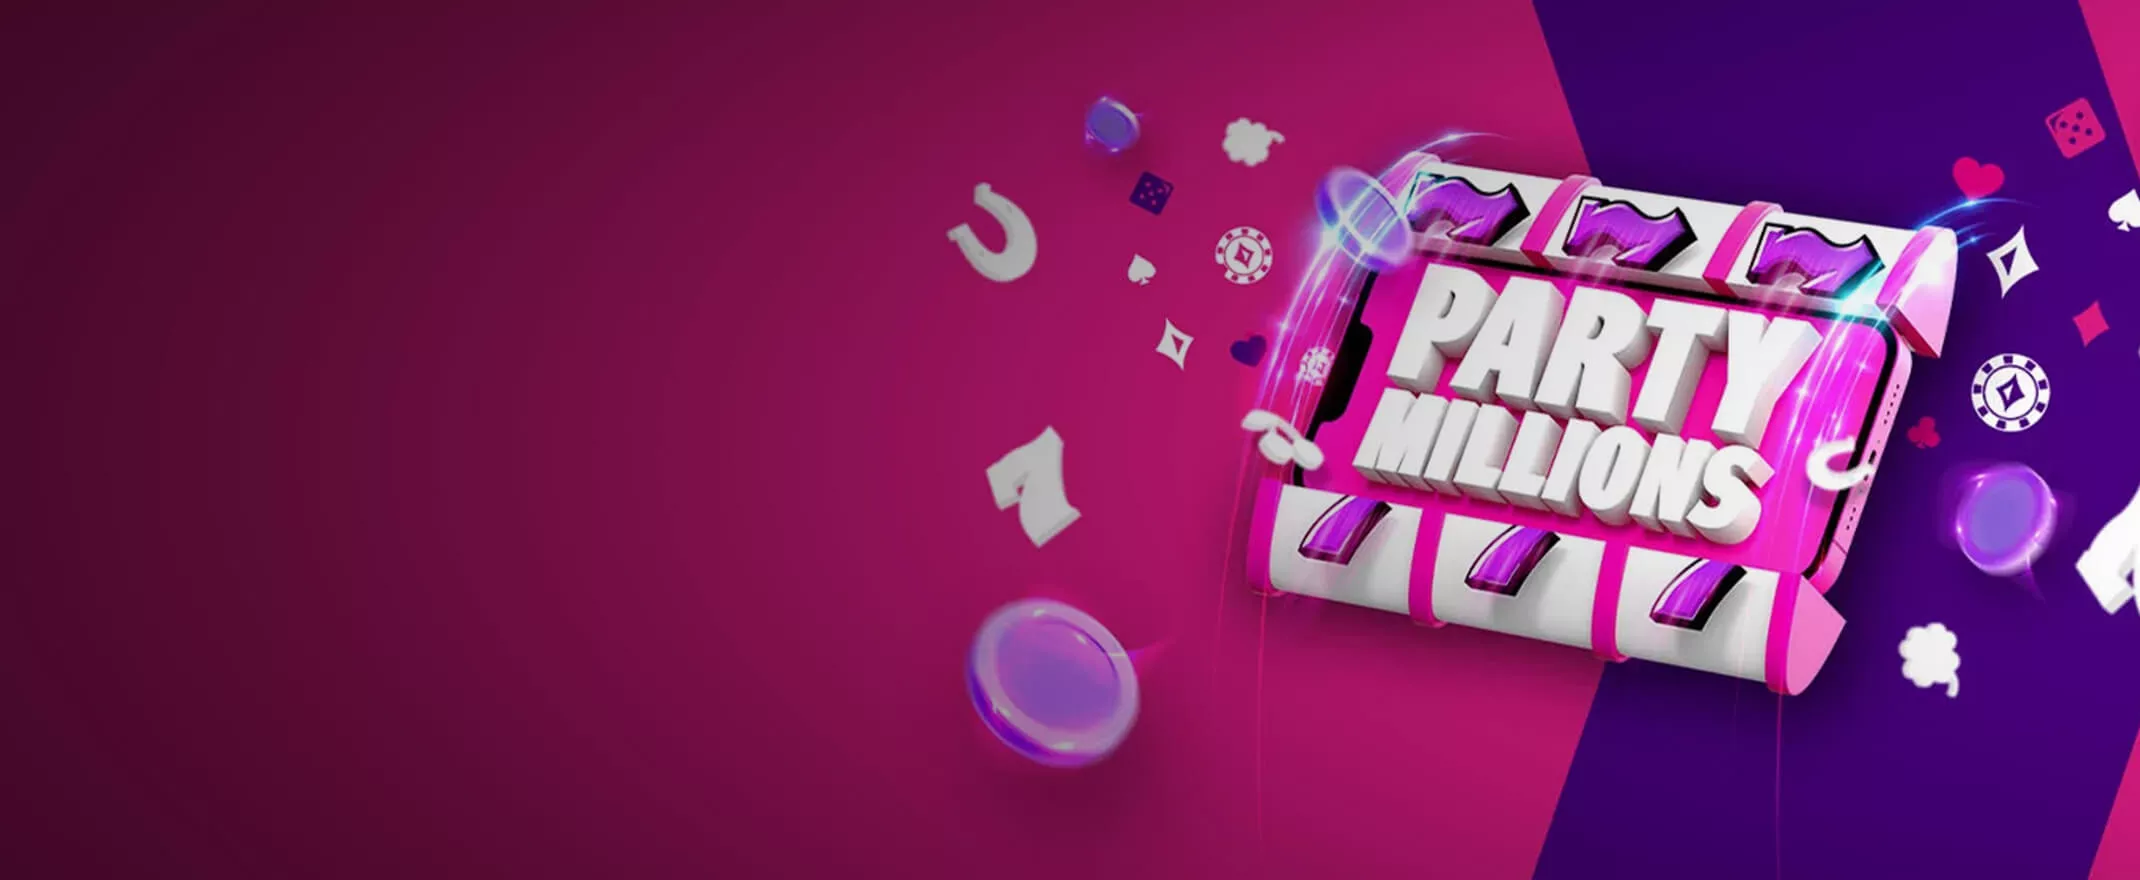 PartyCasino Now Offering a Share of 1 Million Free Spins